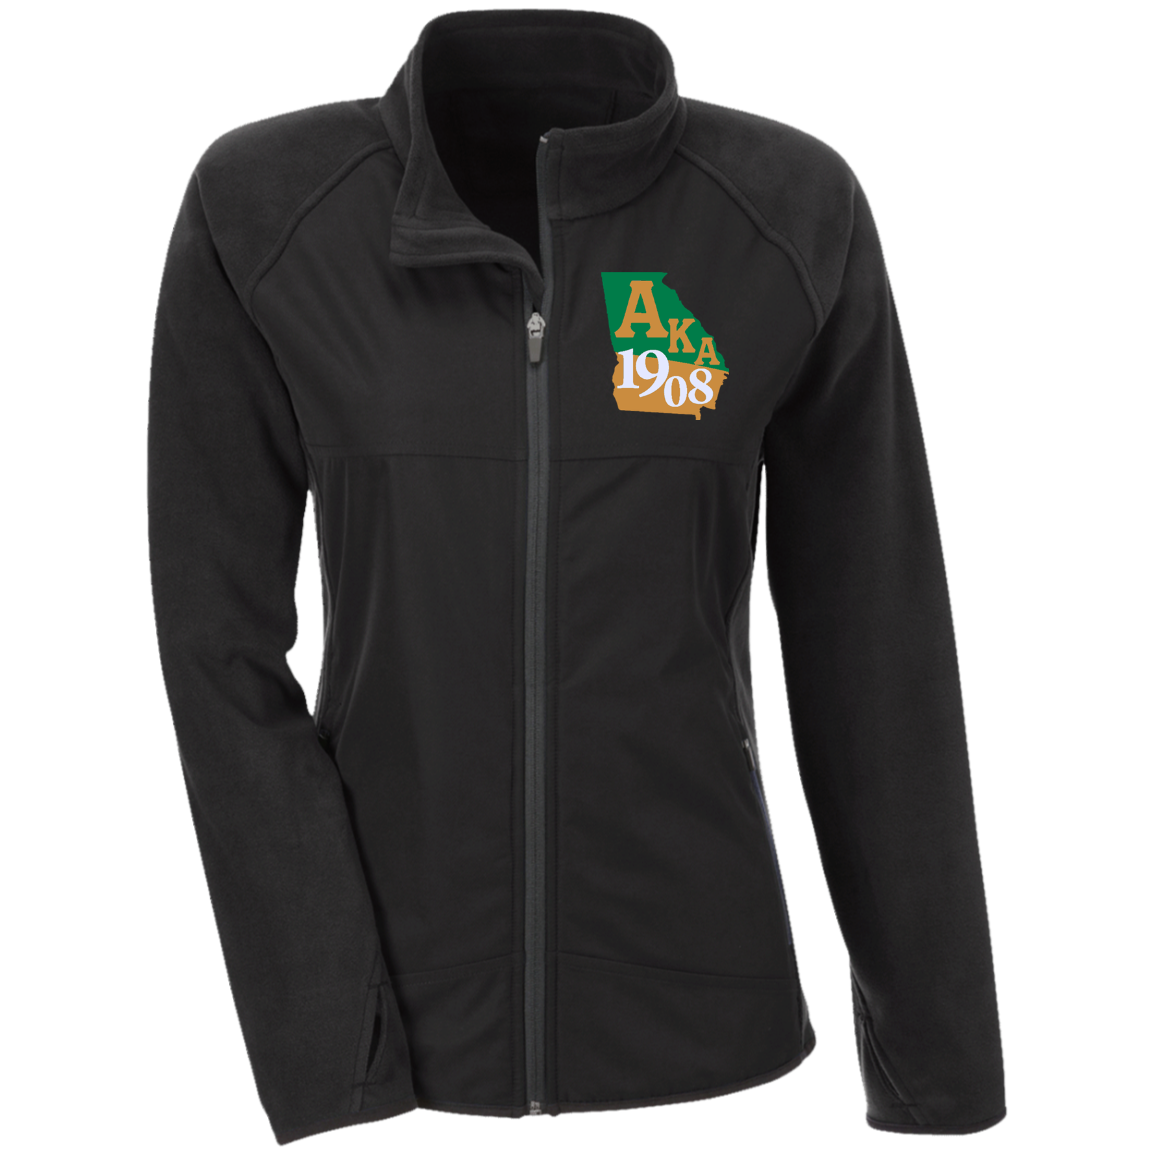 Team 365 Ladies' Microfleece with Front Polyester Overlay